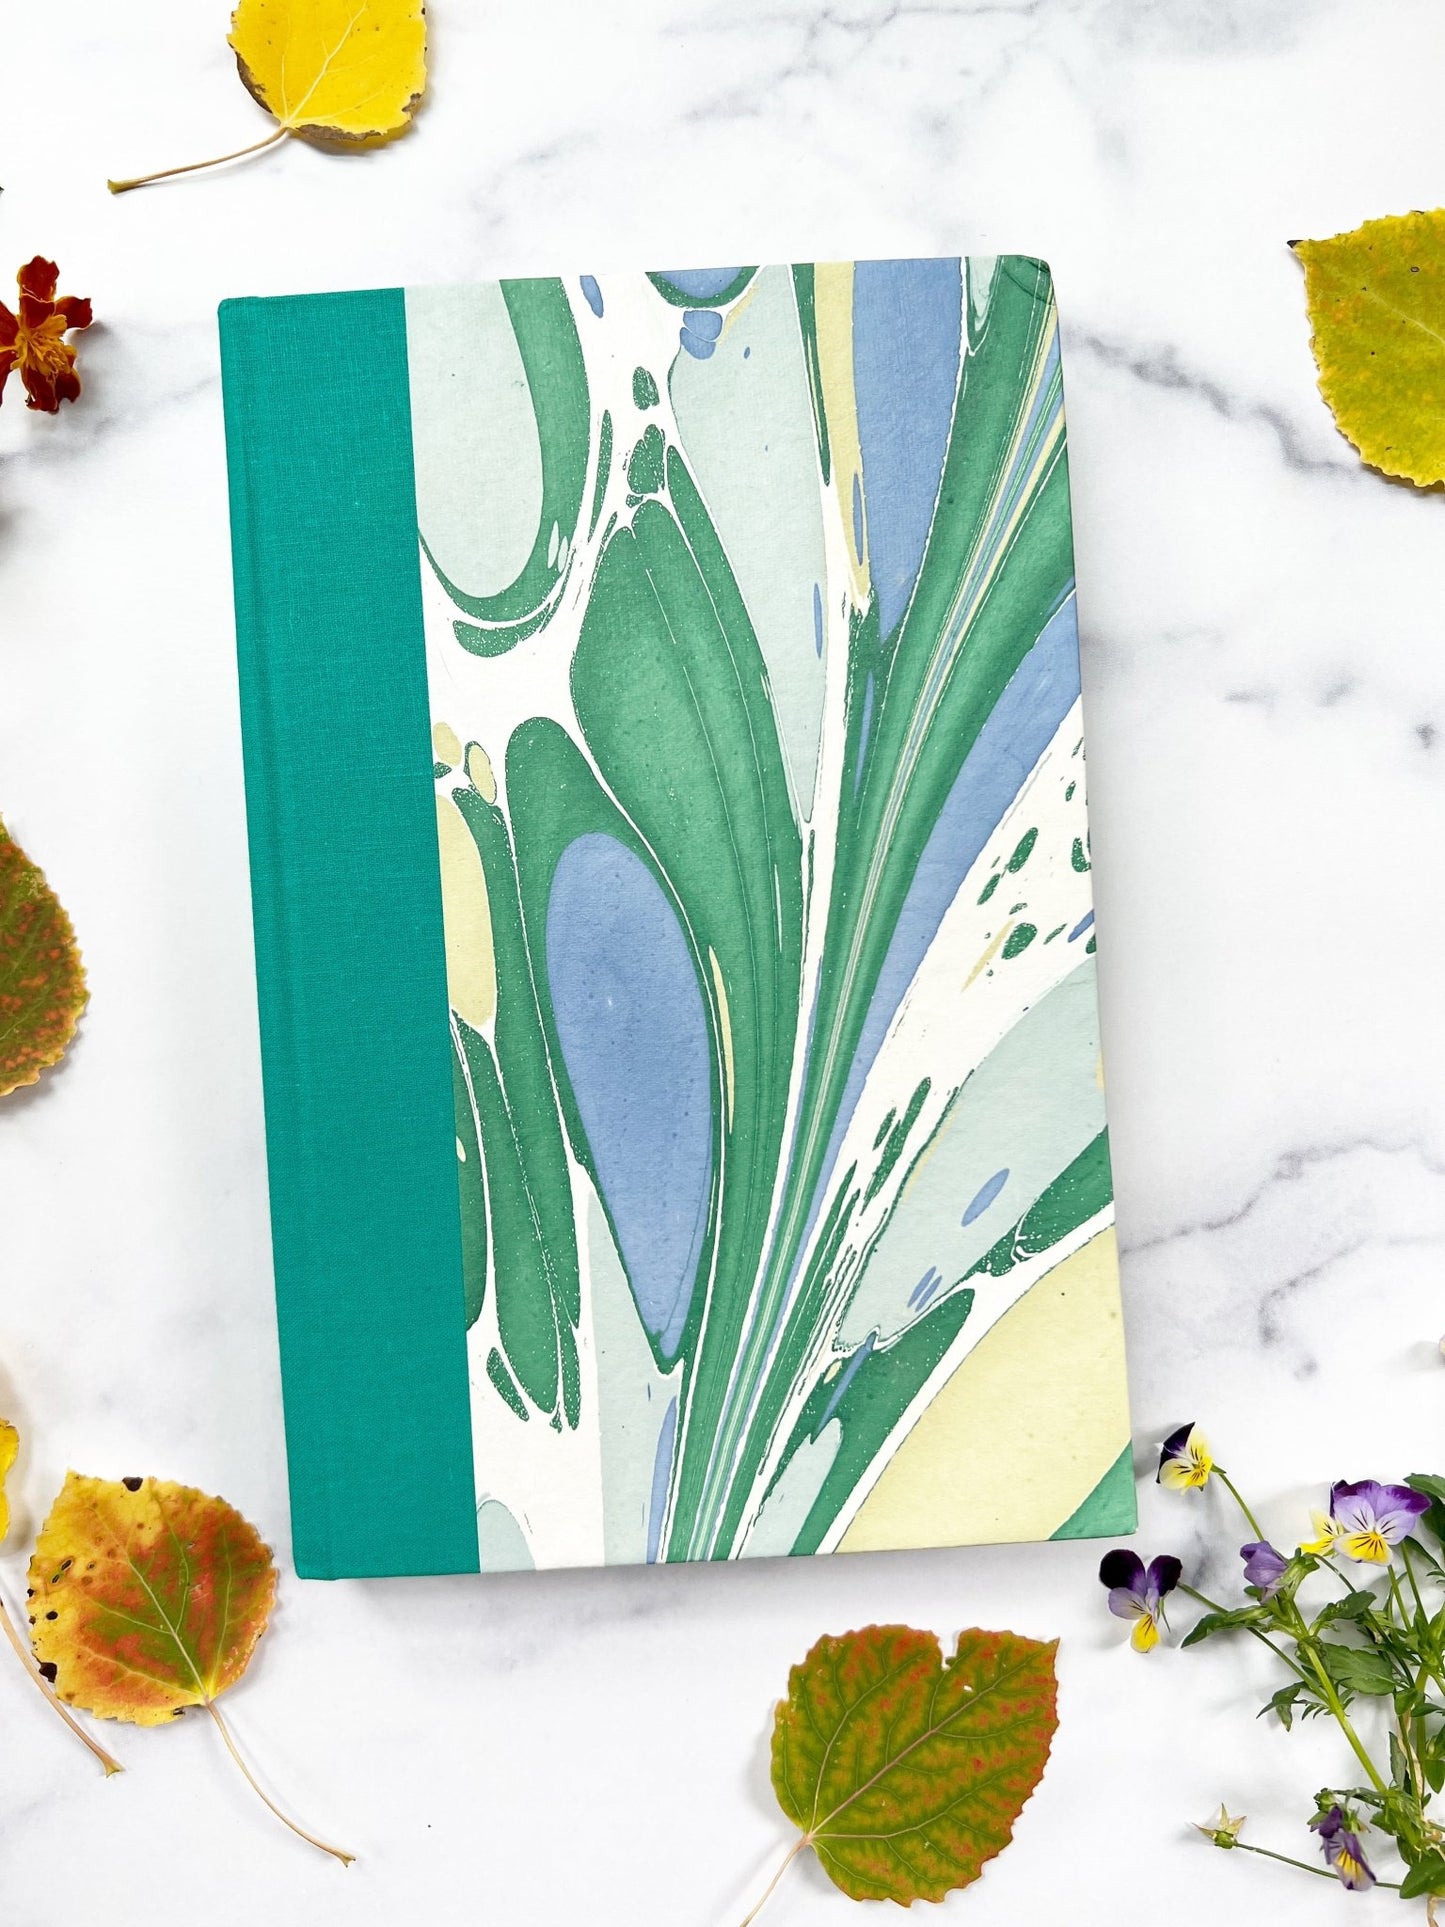 Handmade Watercolor Sketchbook, marbled cover with deckle edged pages